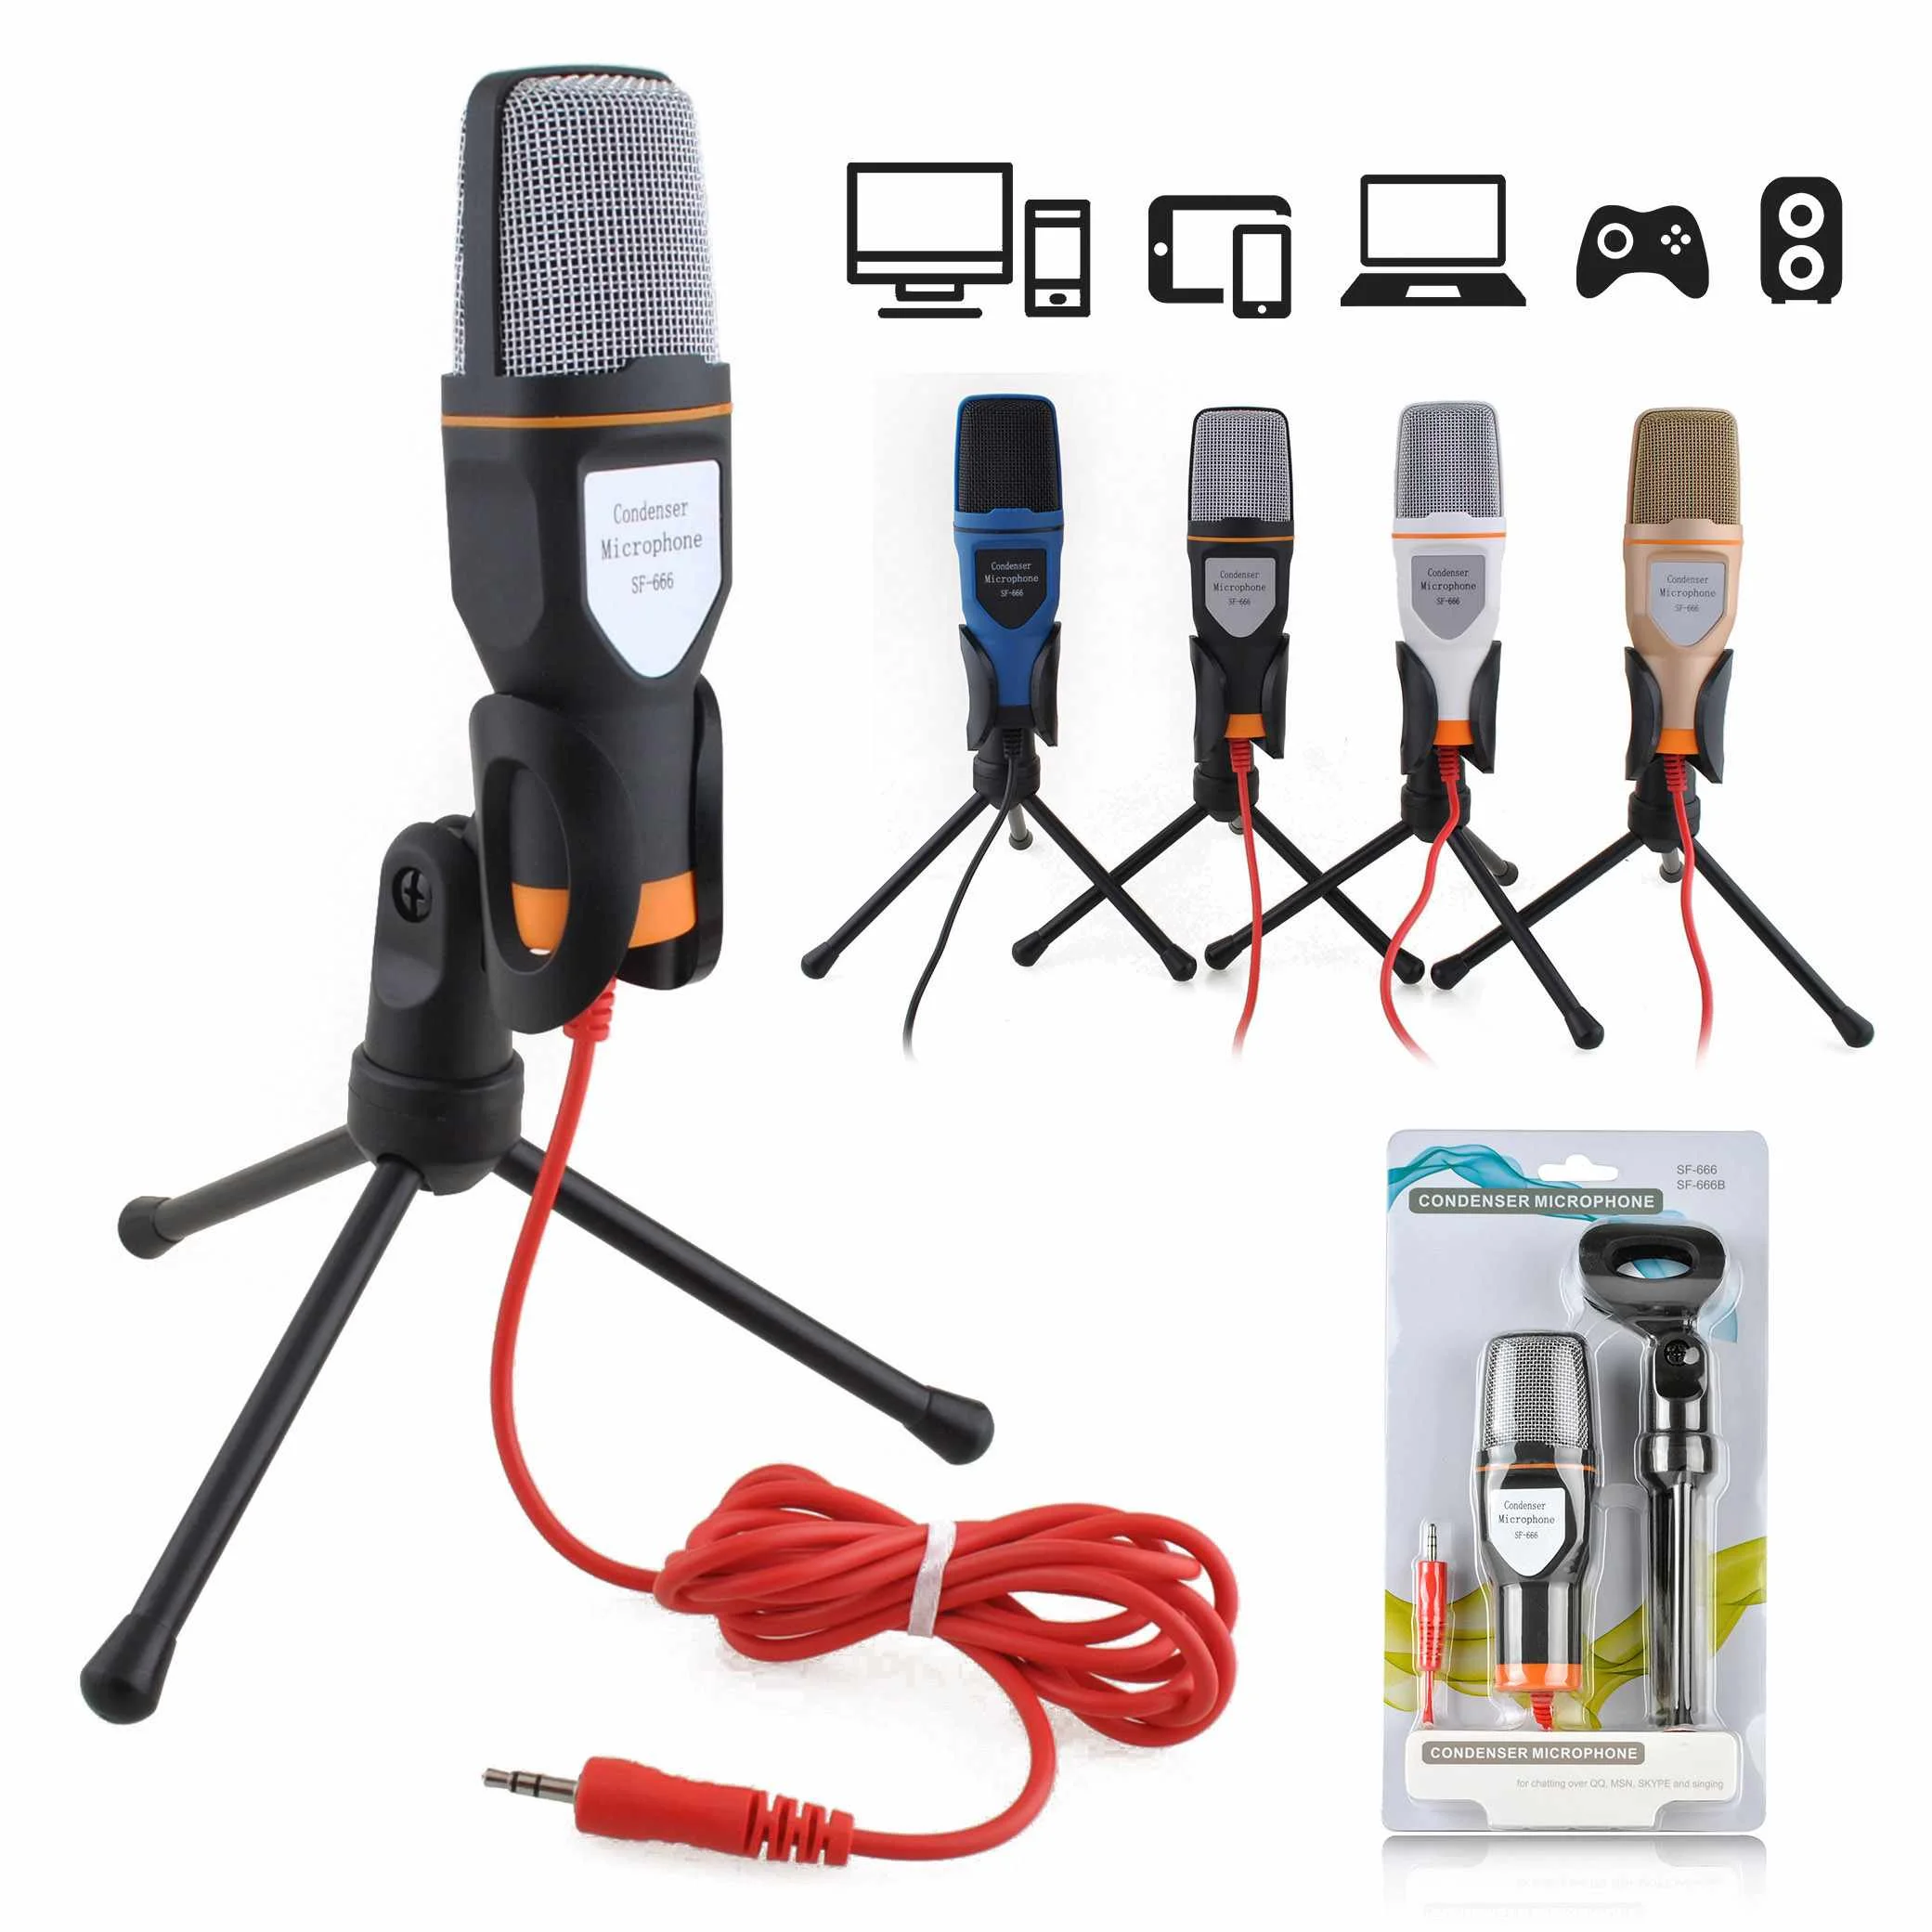 

SONCM SF-666 Condenser Microphone with Desktop Stand for PC Computer Laptop Recording Chatting Gaming Singing